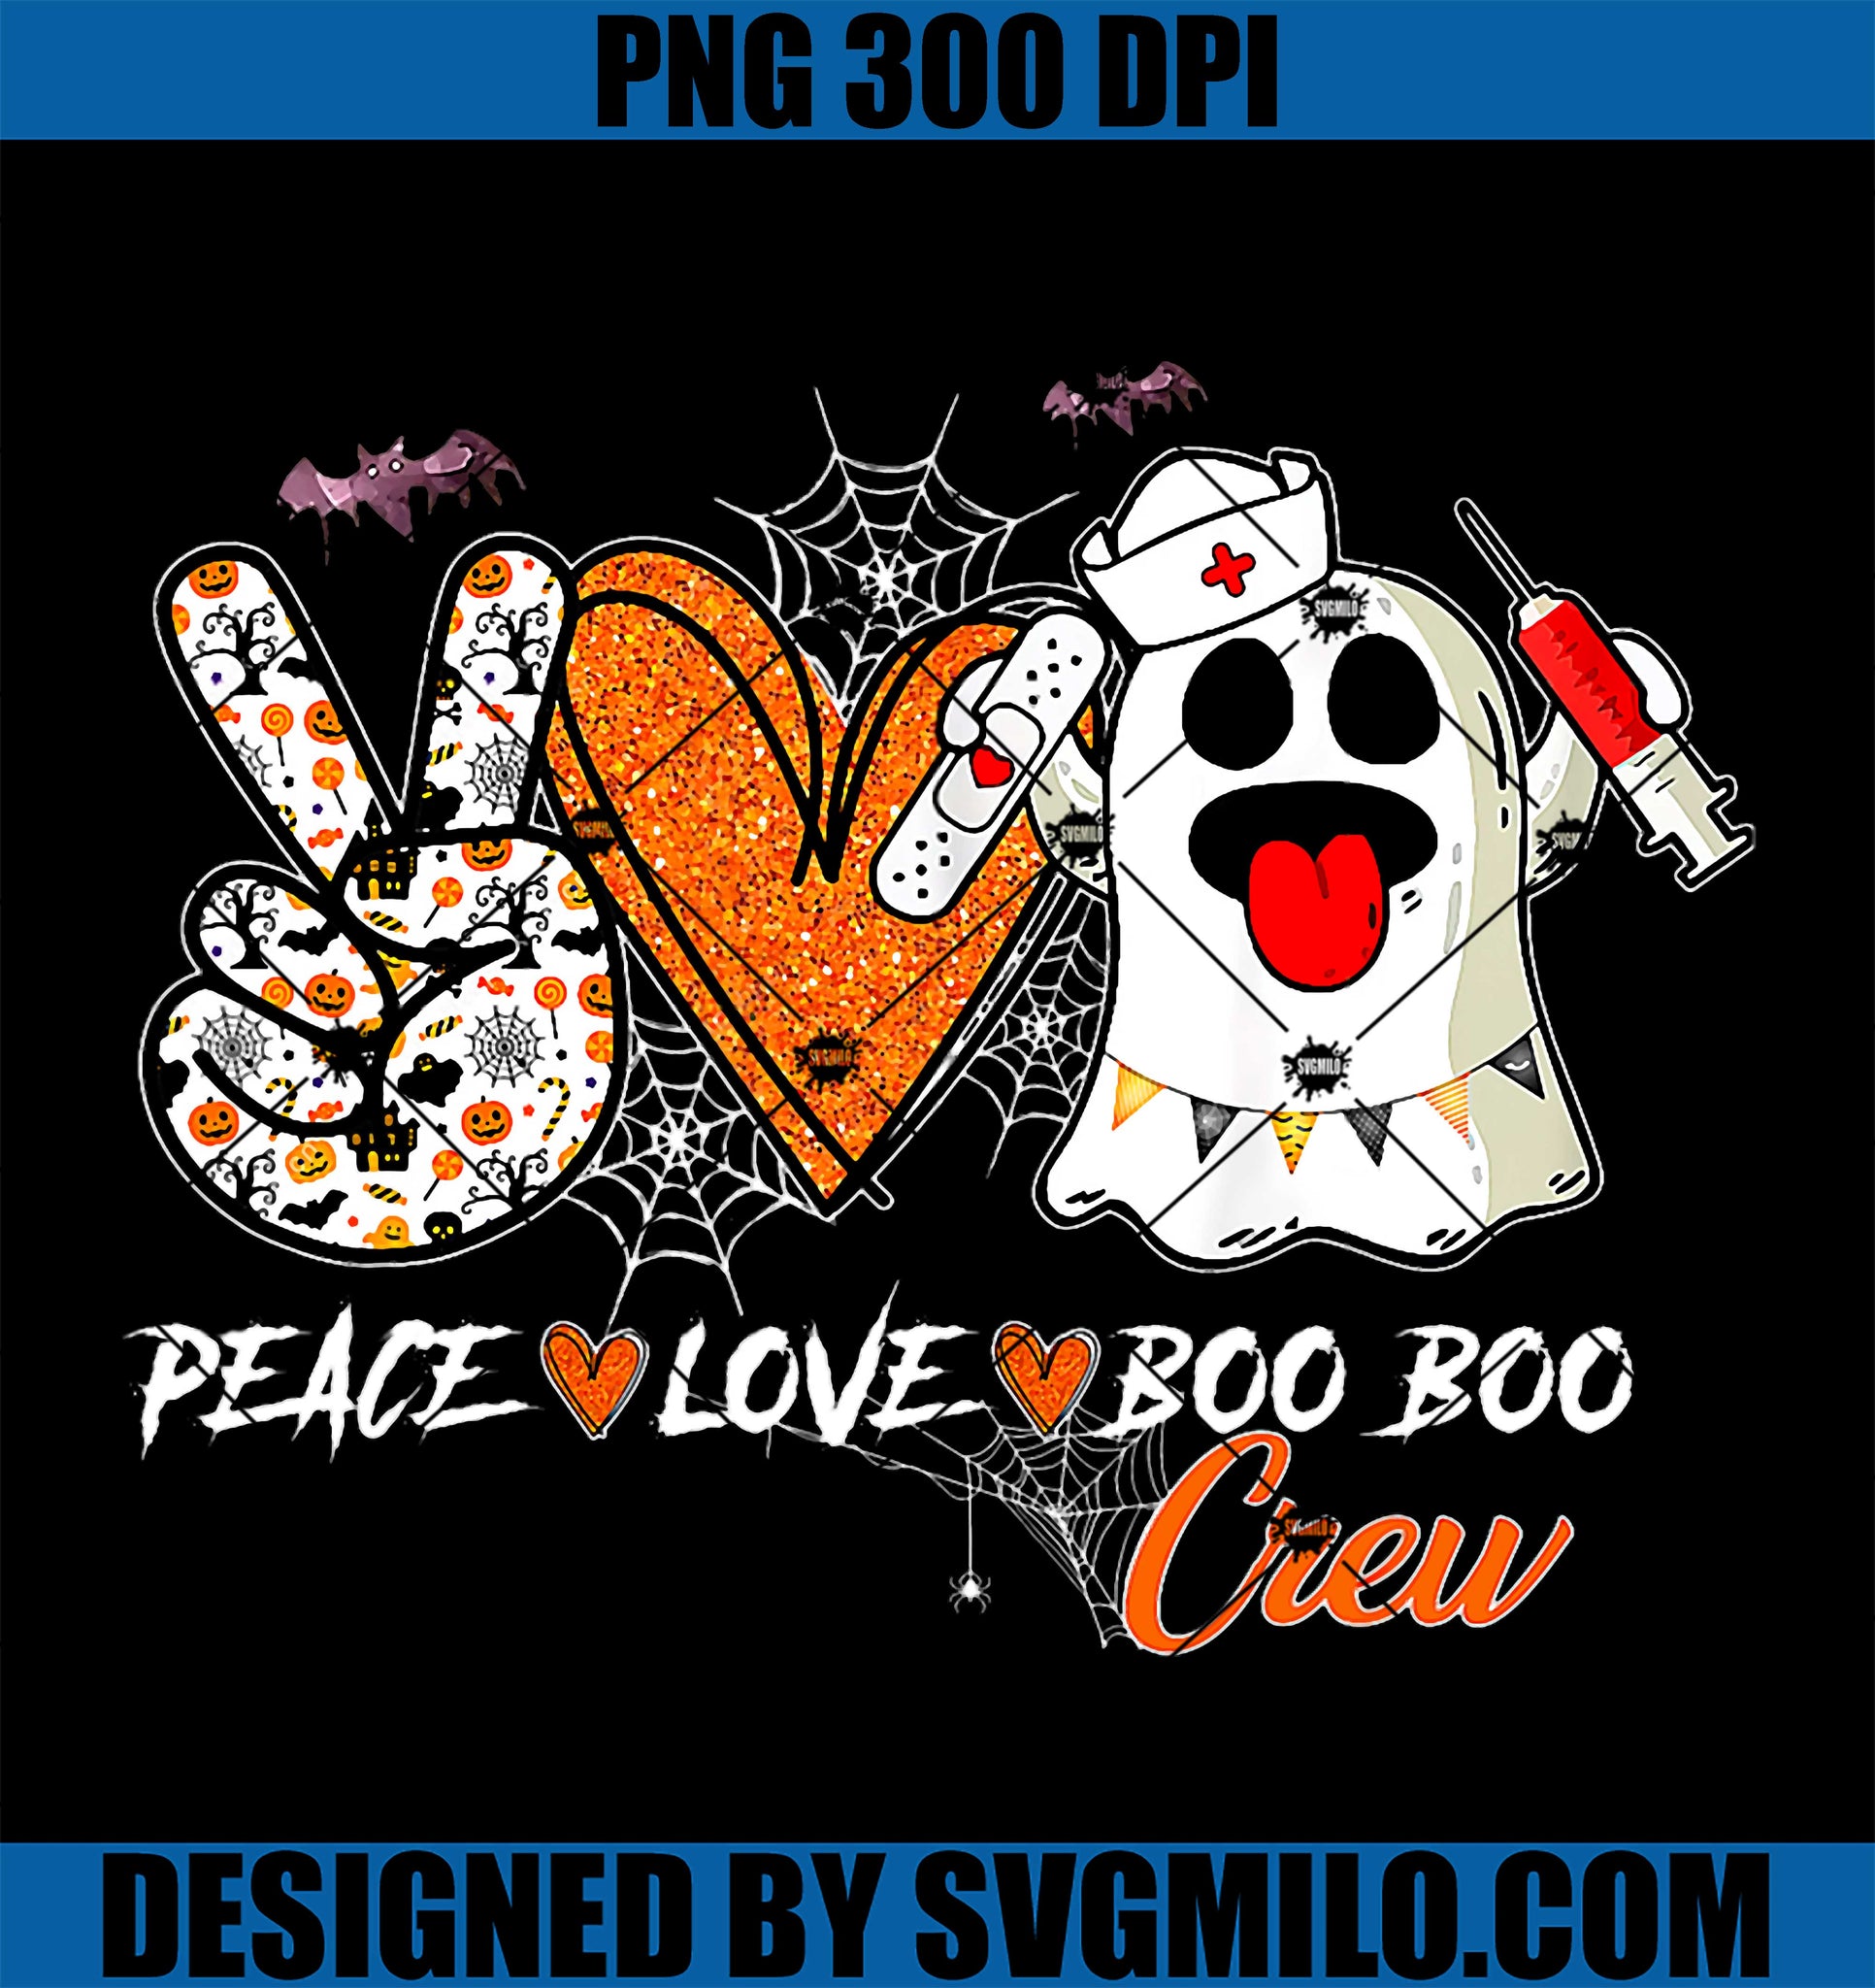 Peace Love Boo Boo Crew PNG, Cute Health Worker Pattern PNG